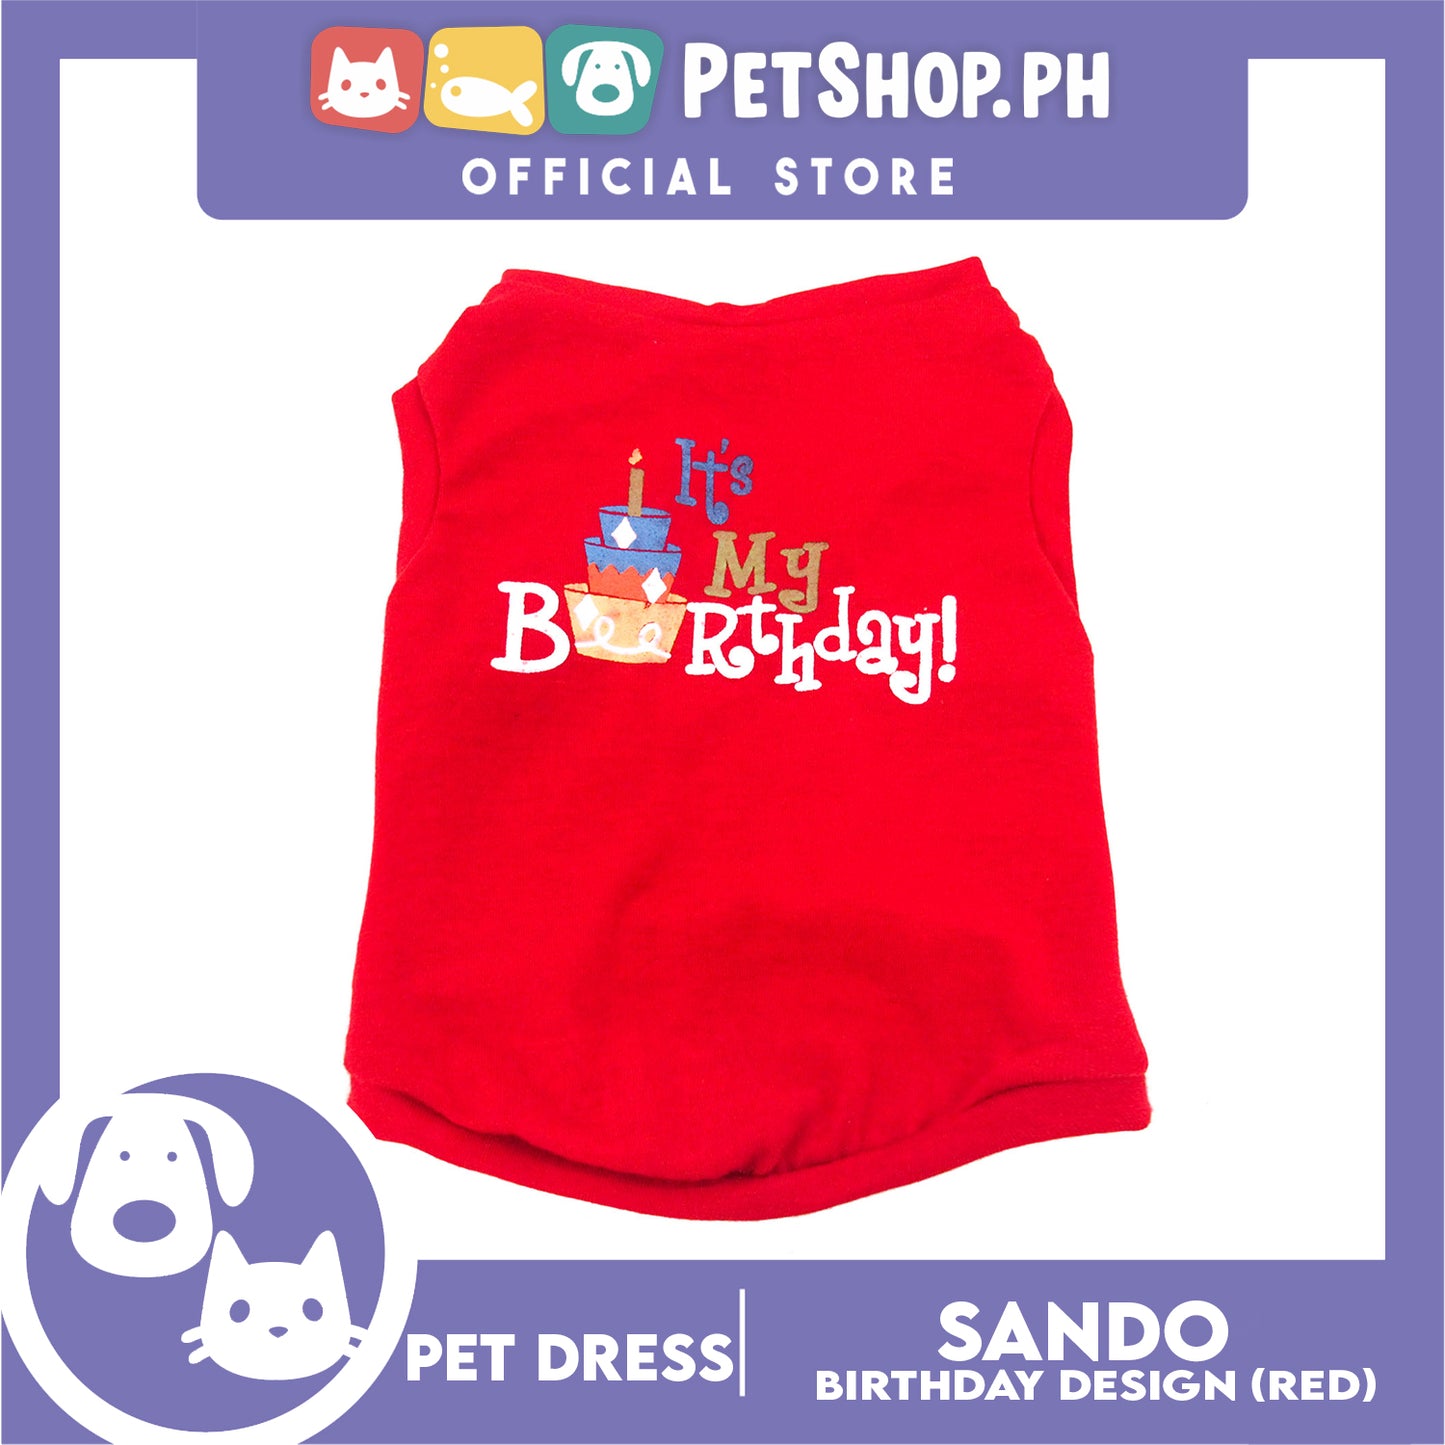 Pet Shirt Sleeveless with It's My Birthday  at Back (Extra Large) for Puppy, Small Dog, & Cat- Sando Breathable Clothes, Pet T-shirt, Dog Sando